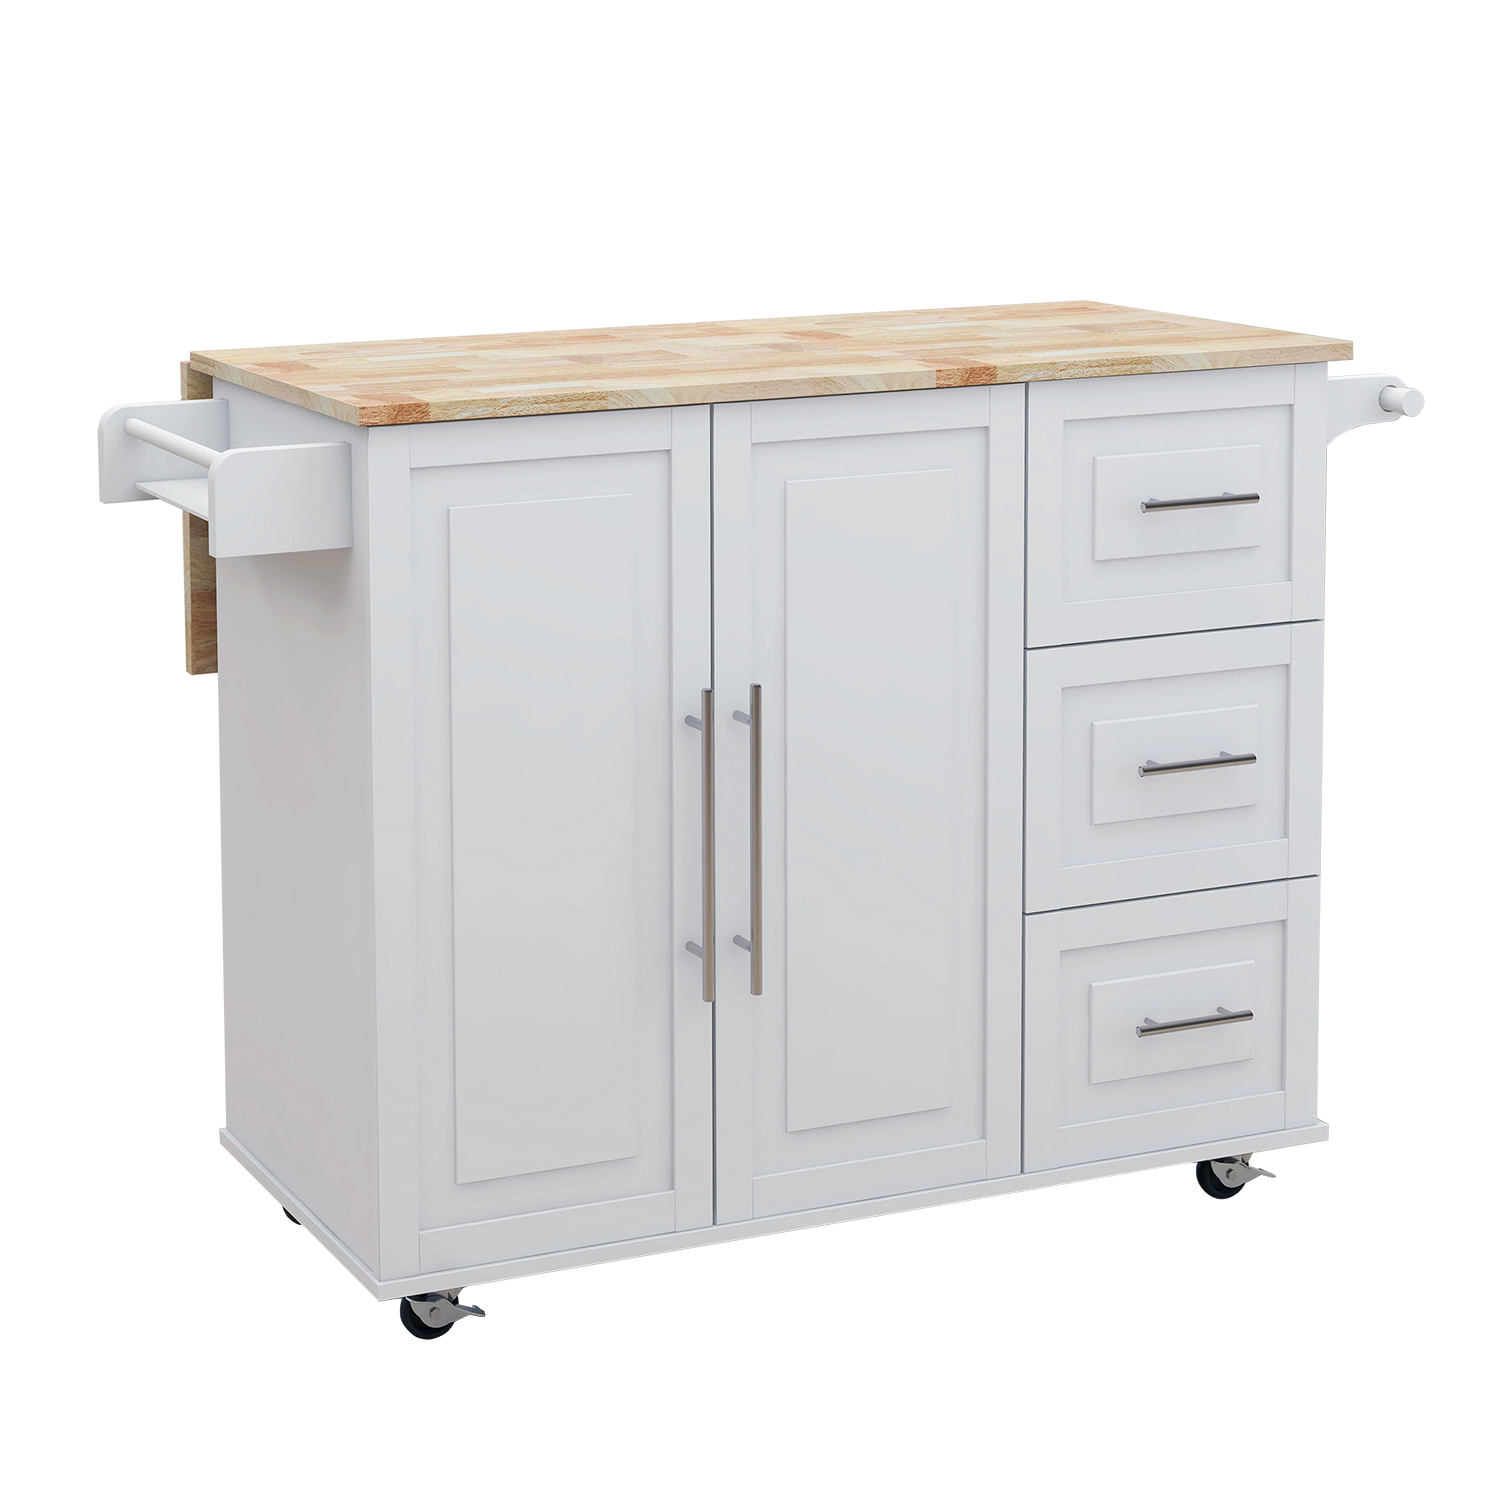 Kitchen Island with Spice Rack, Towel Rack and Extensible Solid Wood Table Top-White-CASAINC